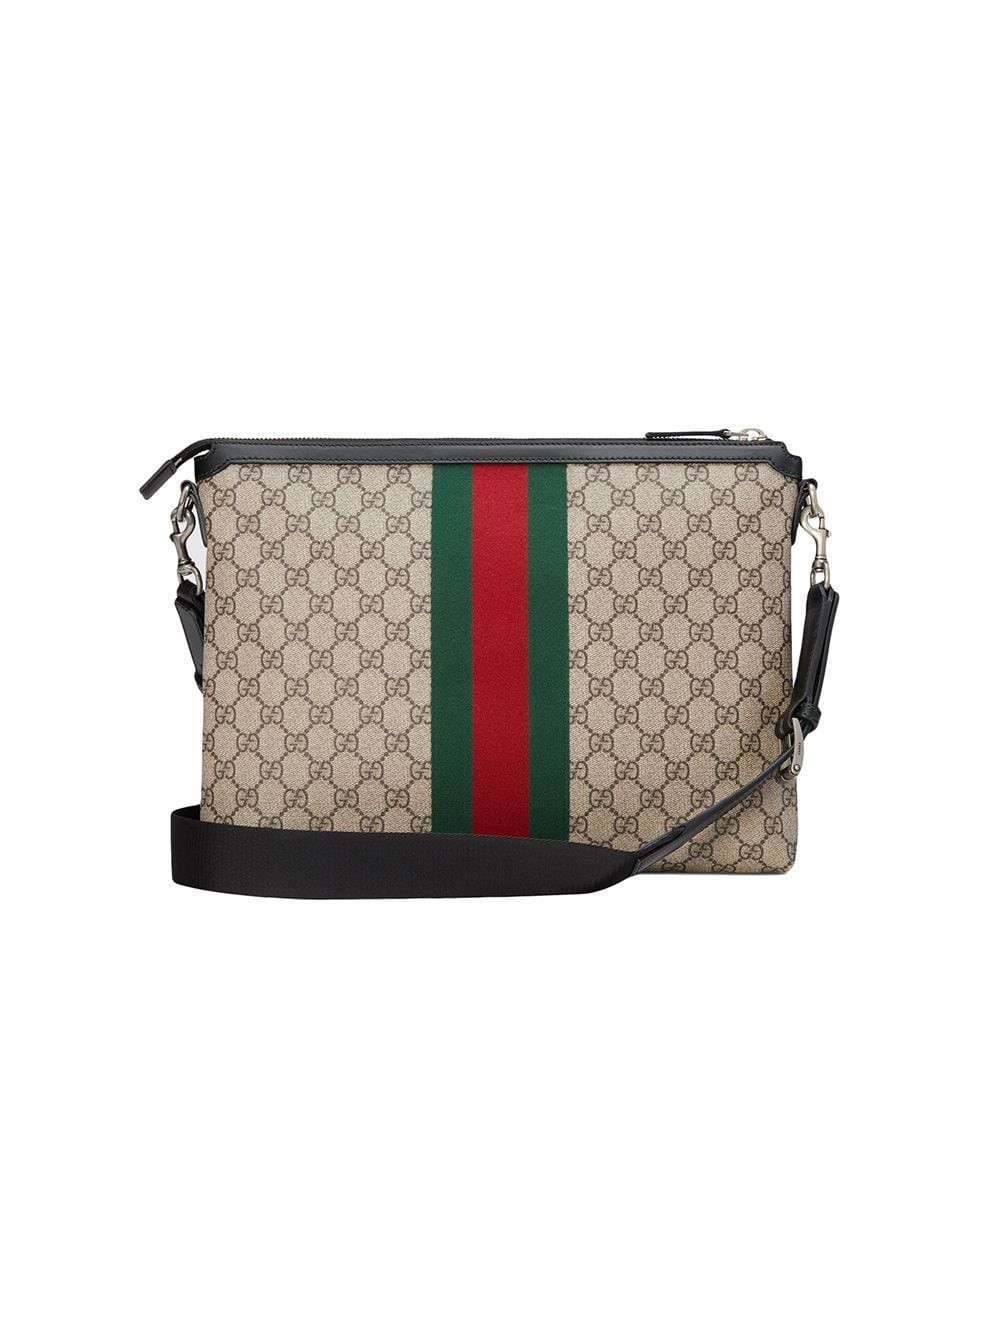 gucci GG PRINT MESSENGER BAG available on www.bagssaleusa.com/product-category/neverfull-bag/ - 25067